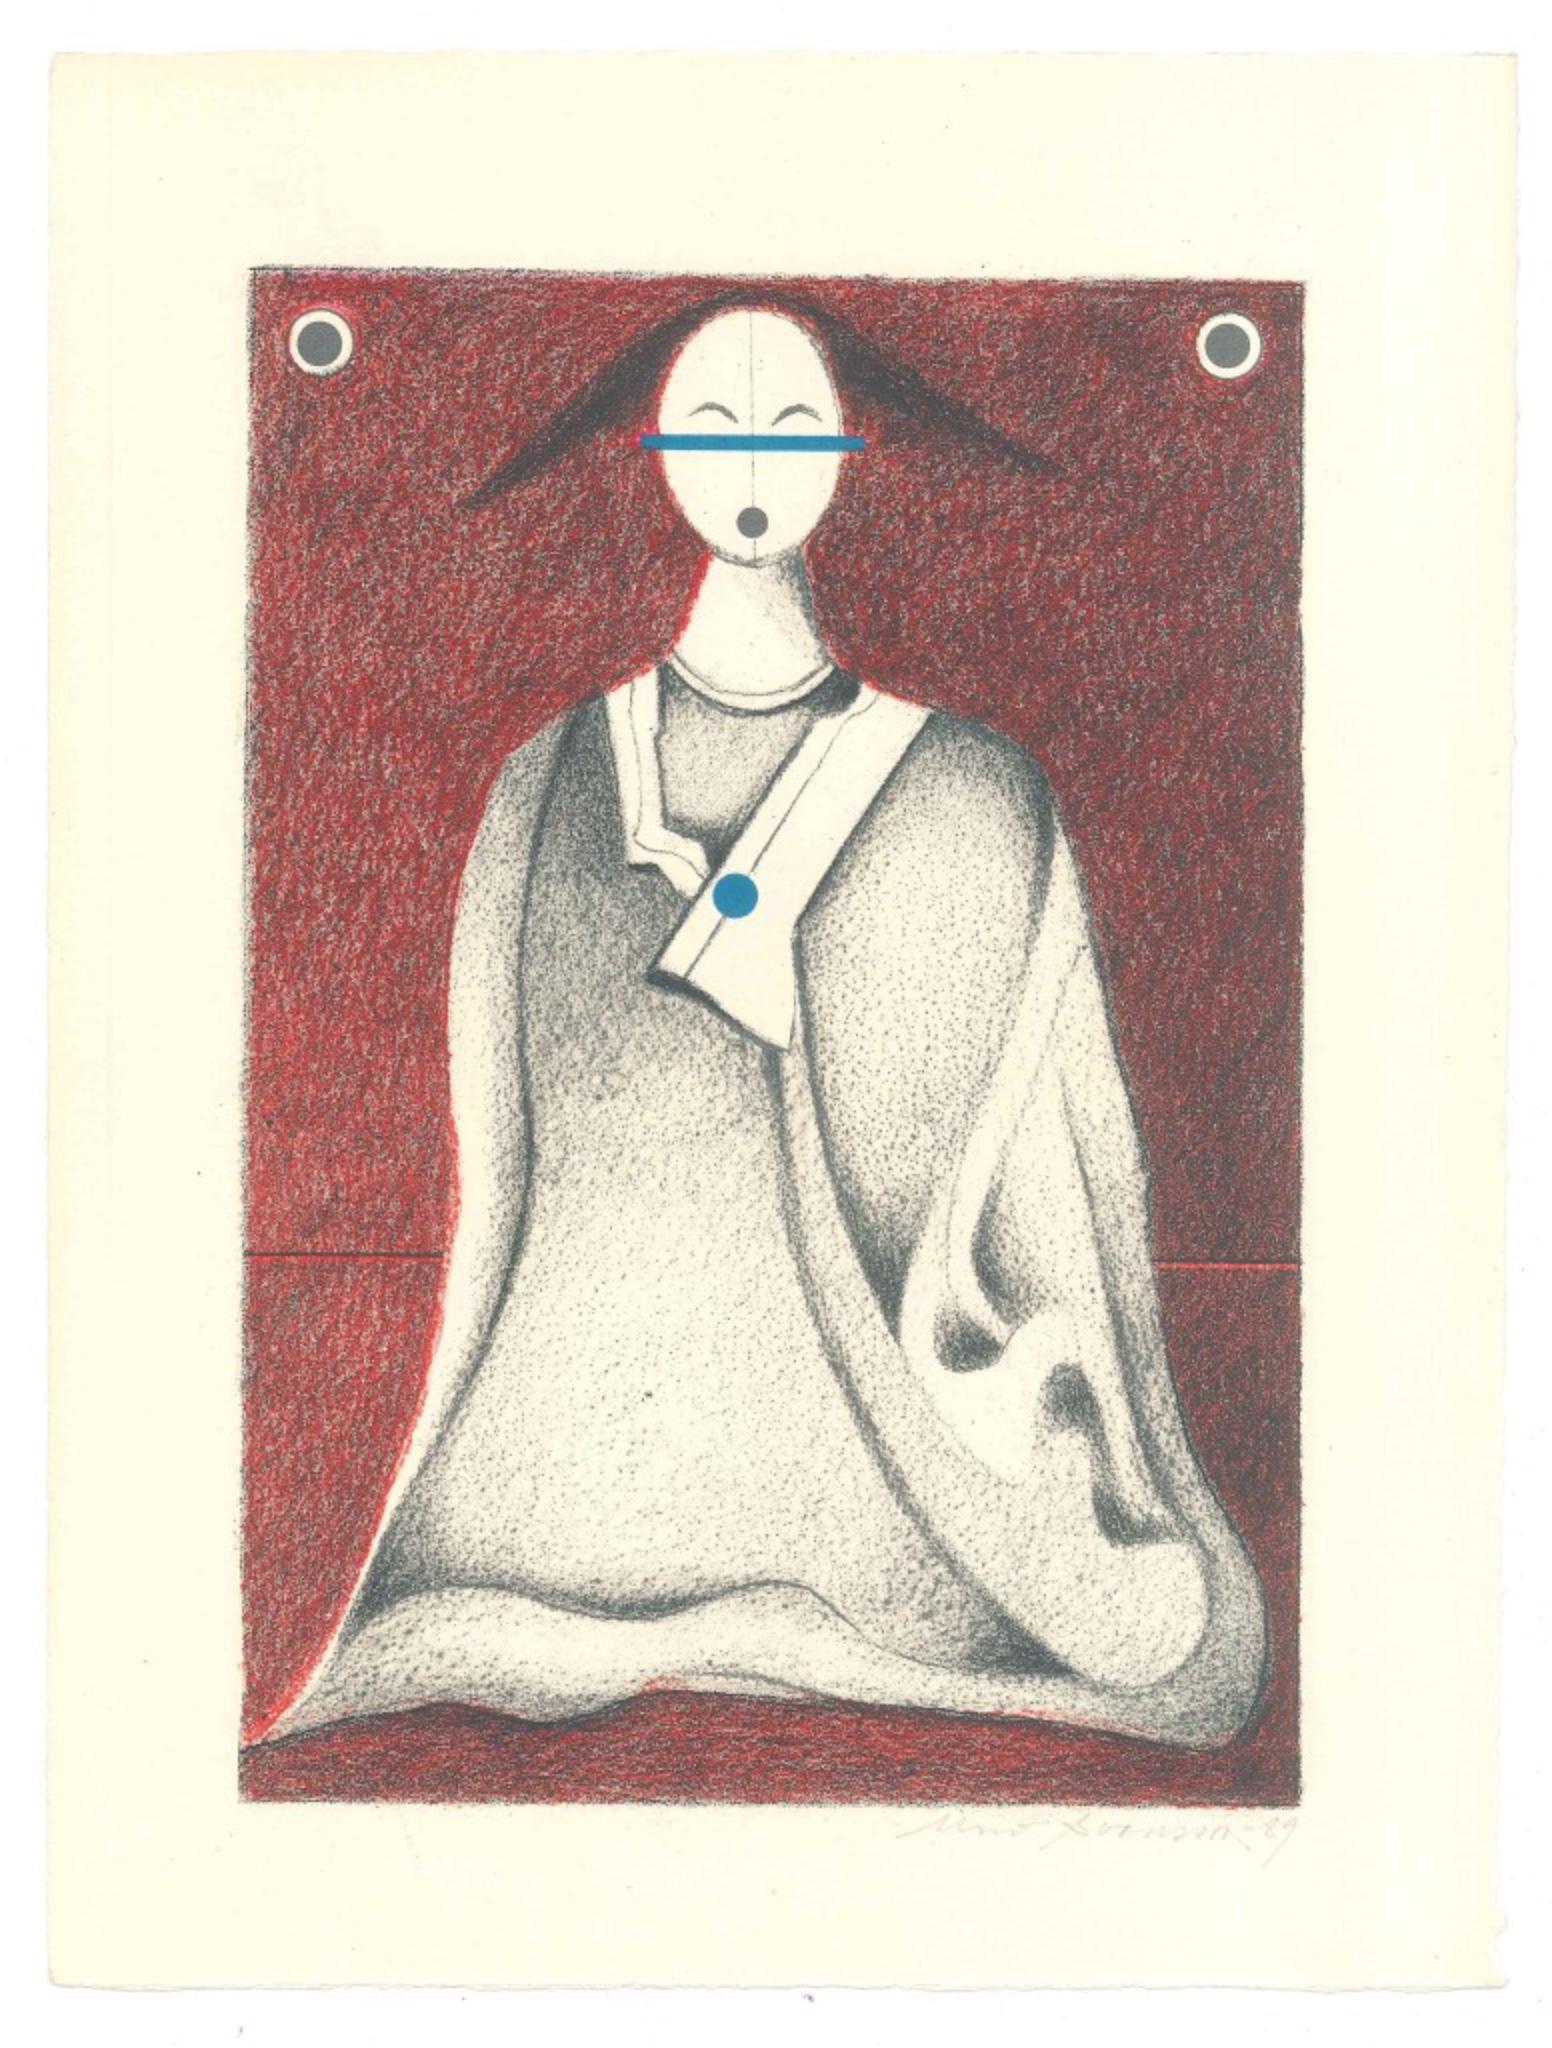 The Japanese is an original lithograph on ivory-colored cardboard, realized by Alfonso Avanessian in 1989. 

Hand-signed and unnumbered, on the lower right: Avanessian -89.

Very good conditions. 

Very beautiful portrait of the Japanese Woman.